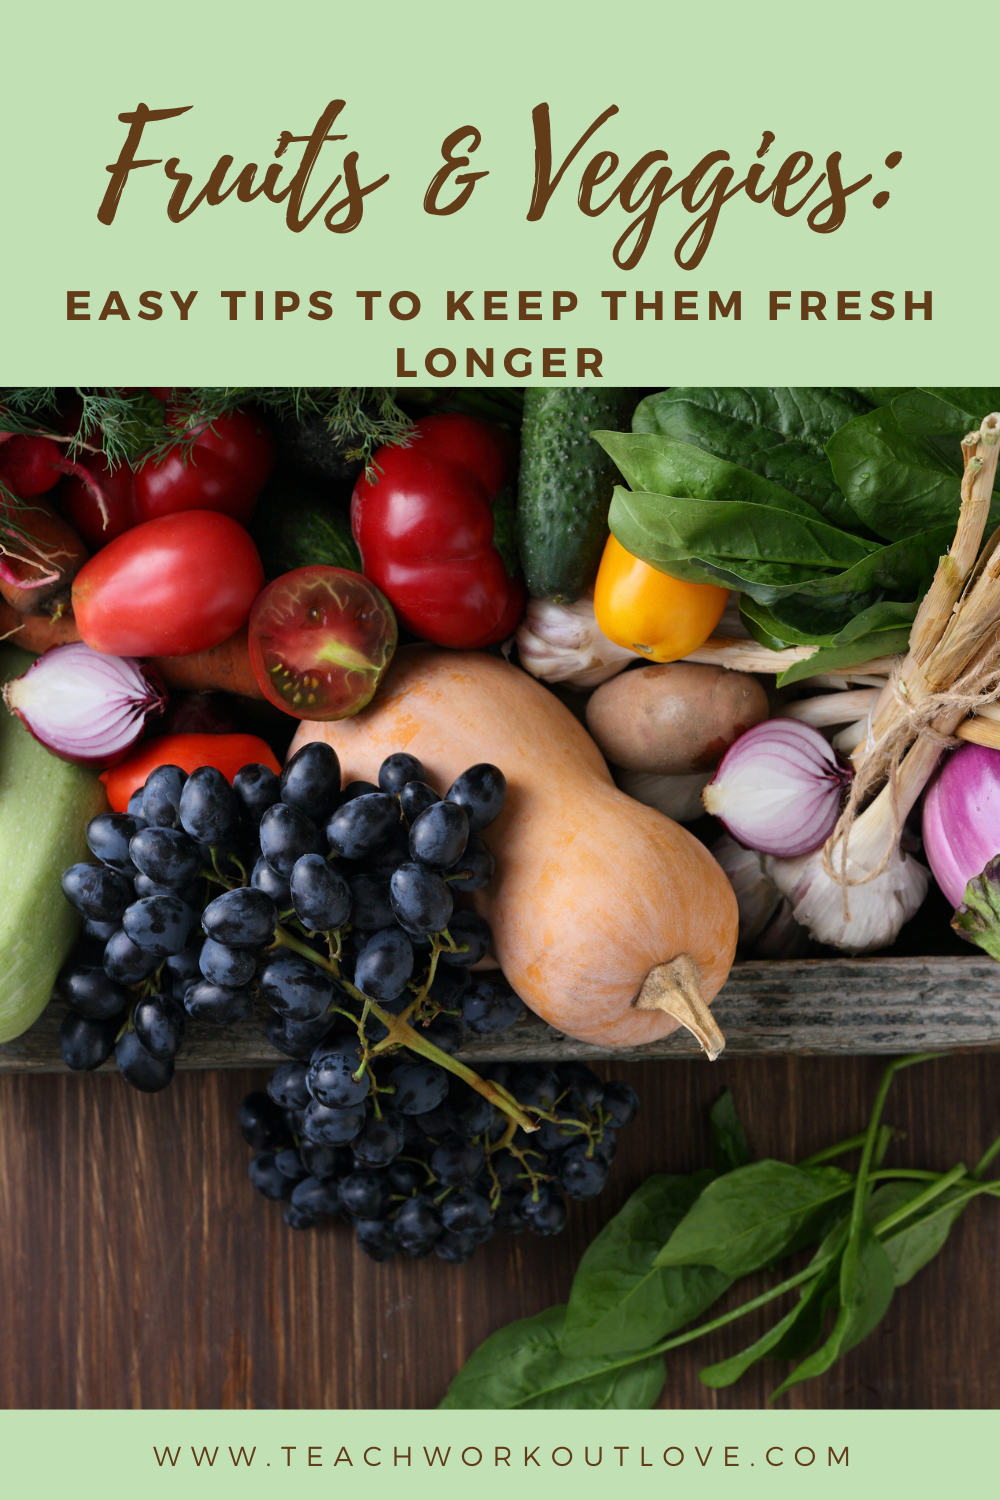 The good news is that waste can be avoided by following some simple guidelines. Here are some ways to make your fruits and vegetables last longer.